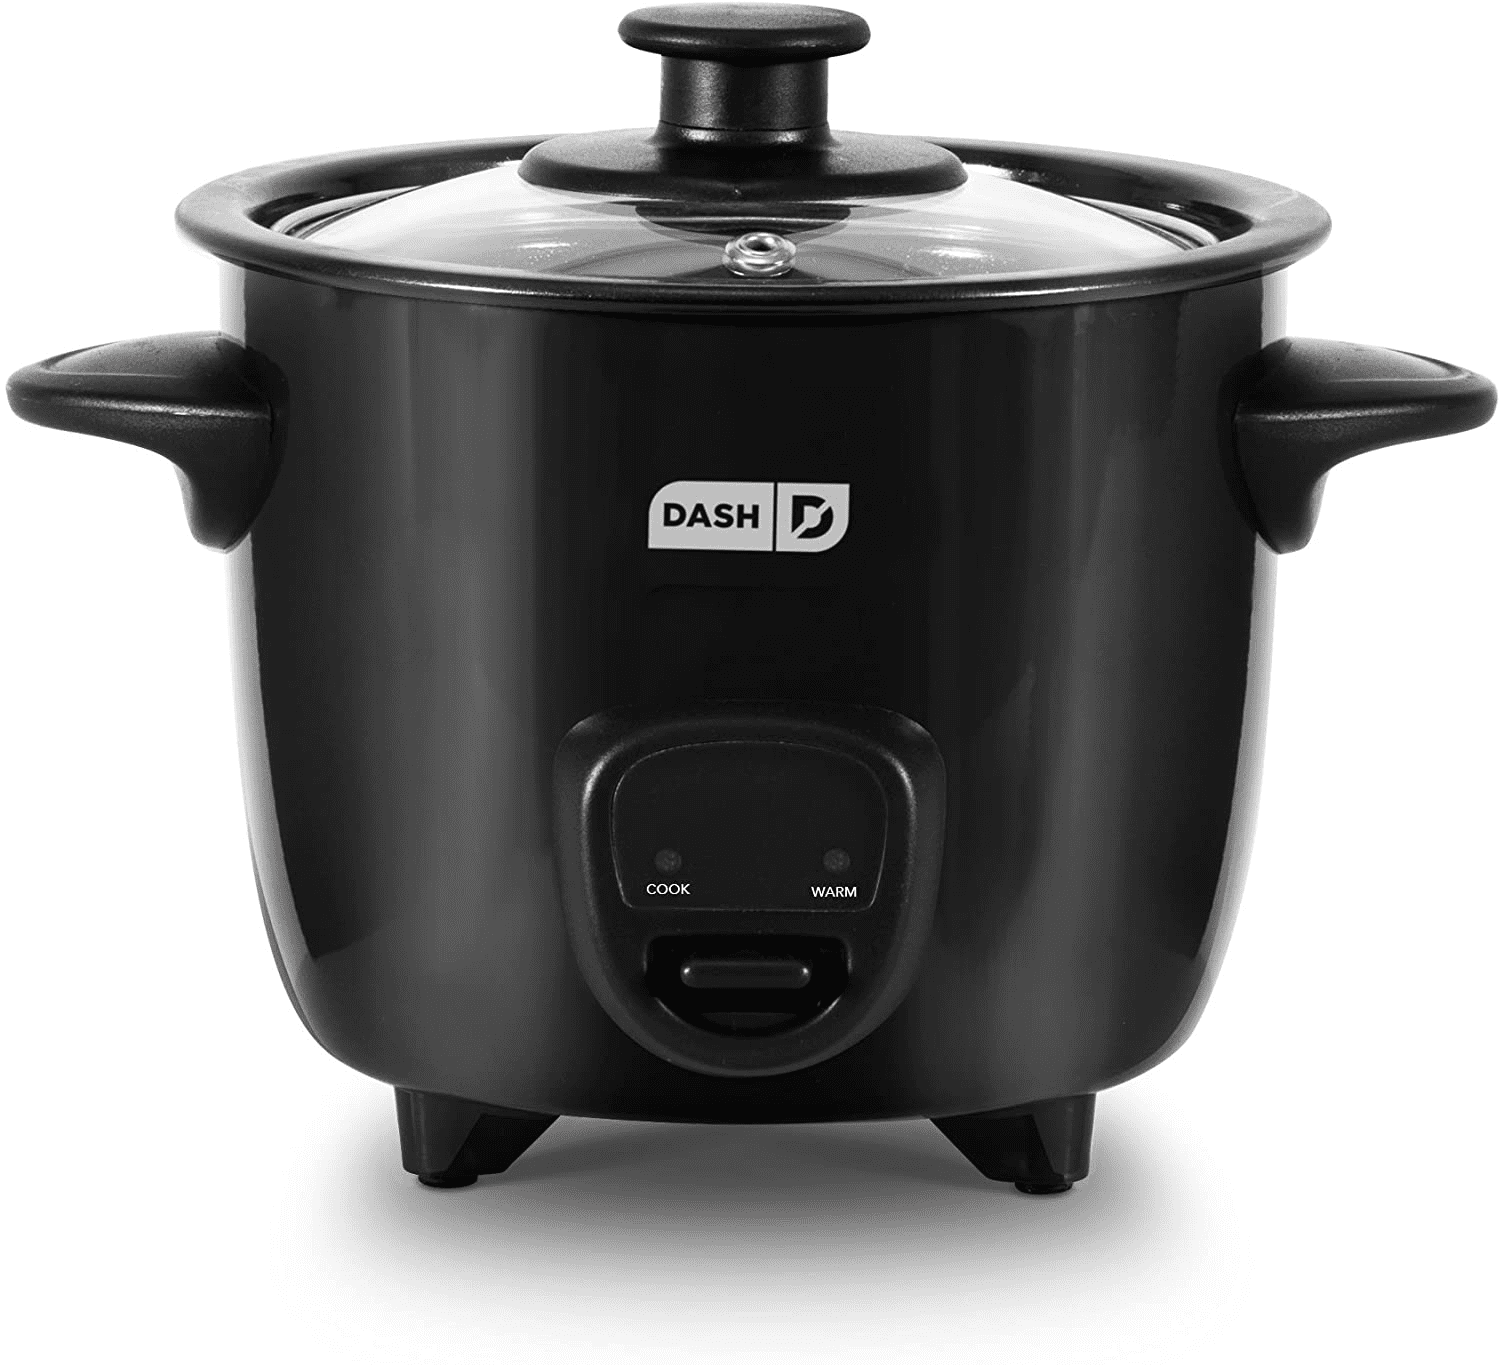 Keep Warm Function & Recipe Guide Stews for Soups Grains & Oatmeal White 2 cups Dash DRCM200GBWH04 Mini Rice Cooker Steamer with Removable Nonstick Pot